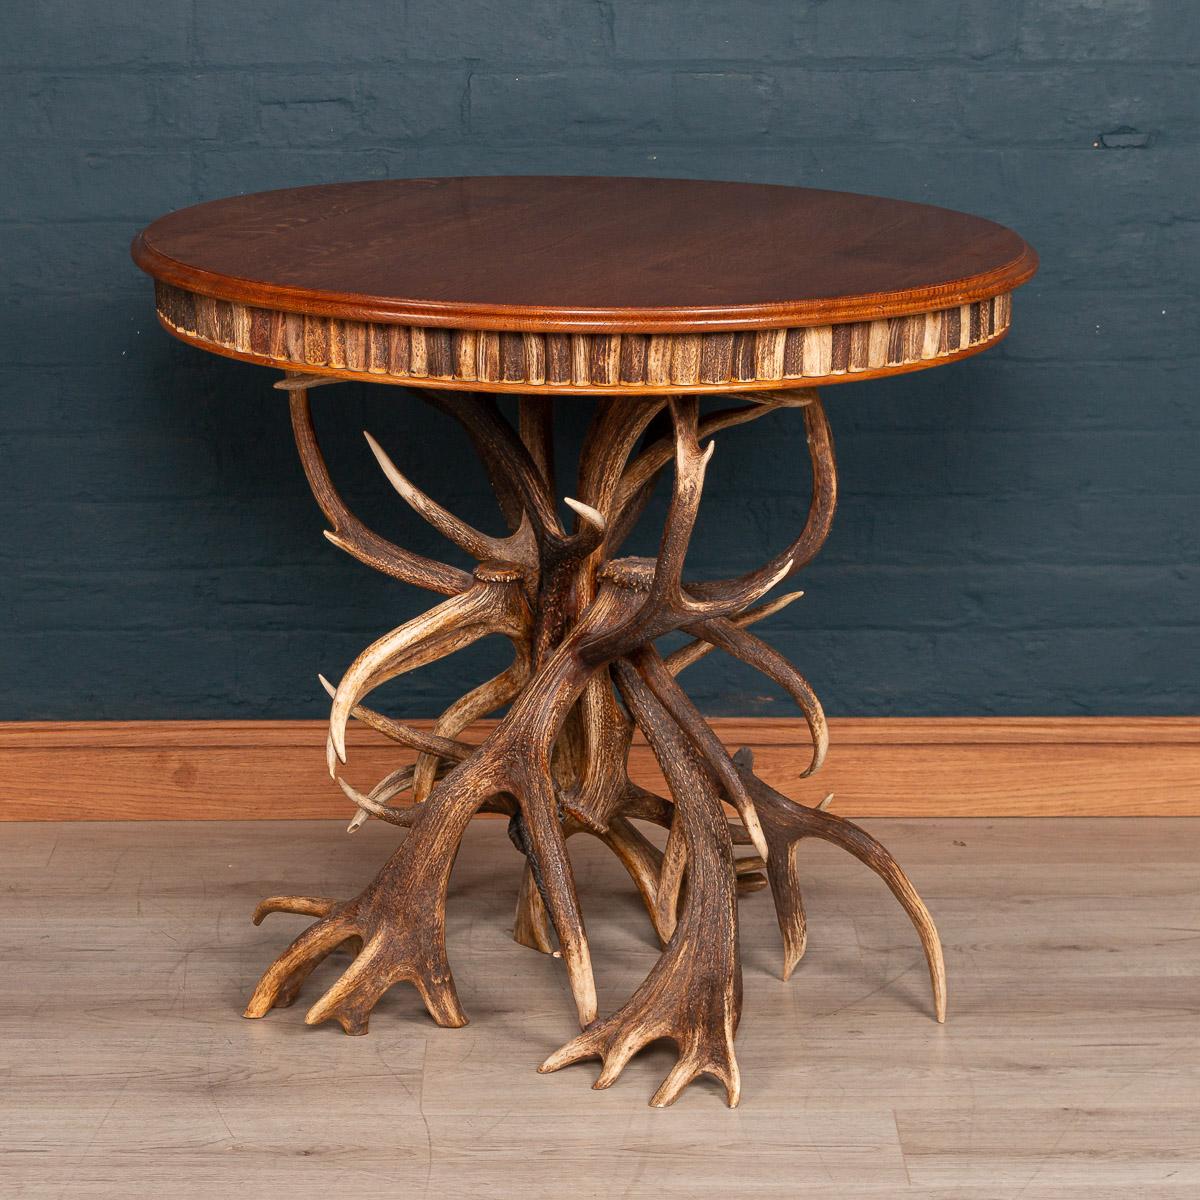 An extremely unusual mid-20th century centre table by Anthony Redmile. The side of the table profusely decorated with sections of antler horn and the table leg fashioned from whole antlers. The British designer Anthony Redmile was known in the 1960s